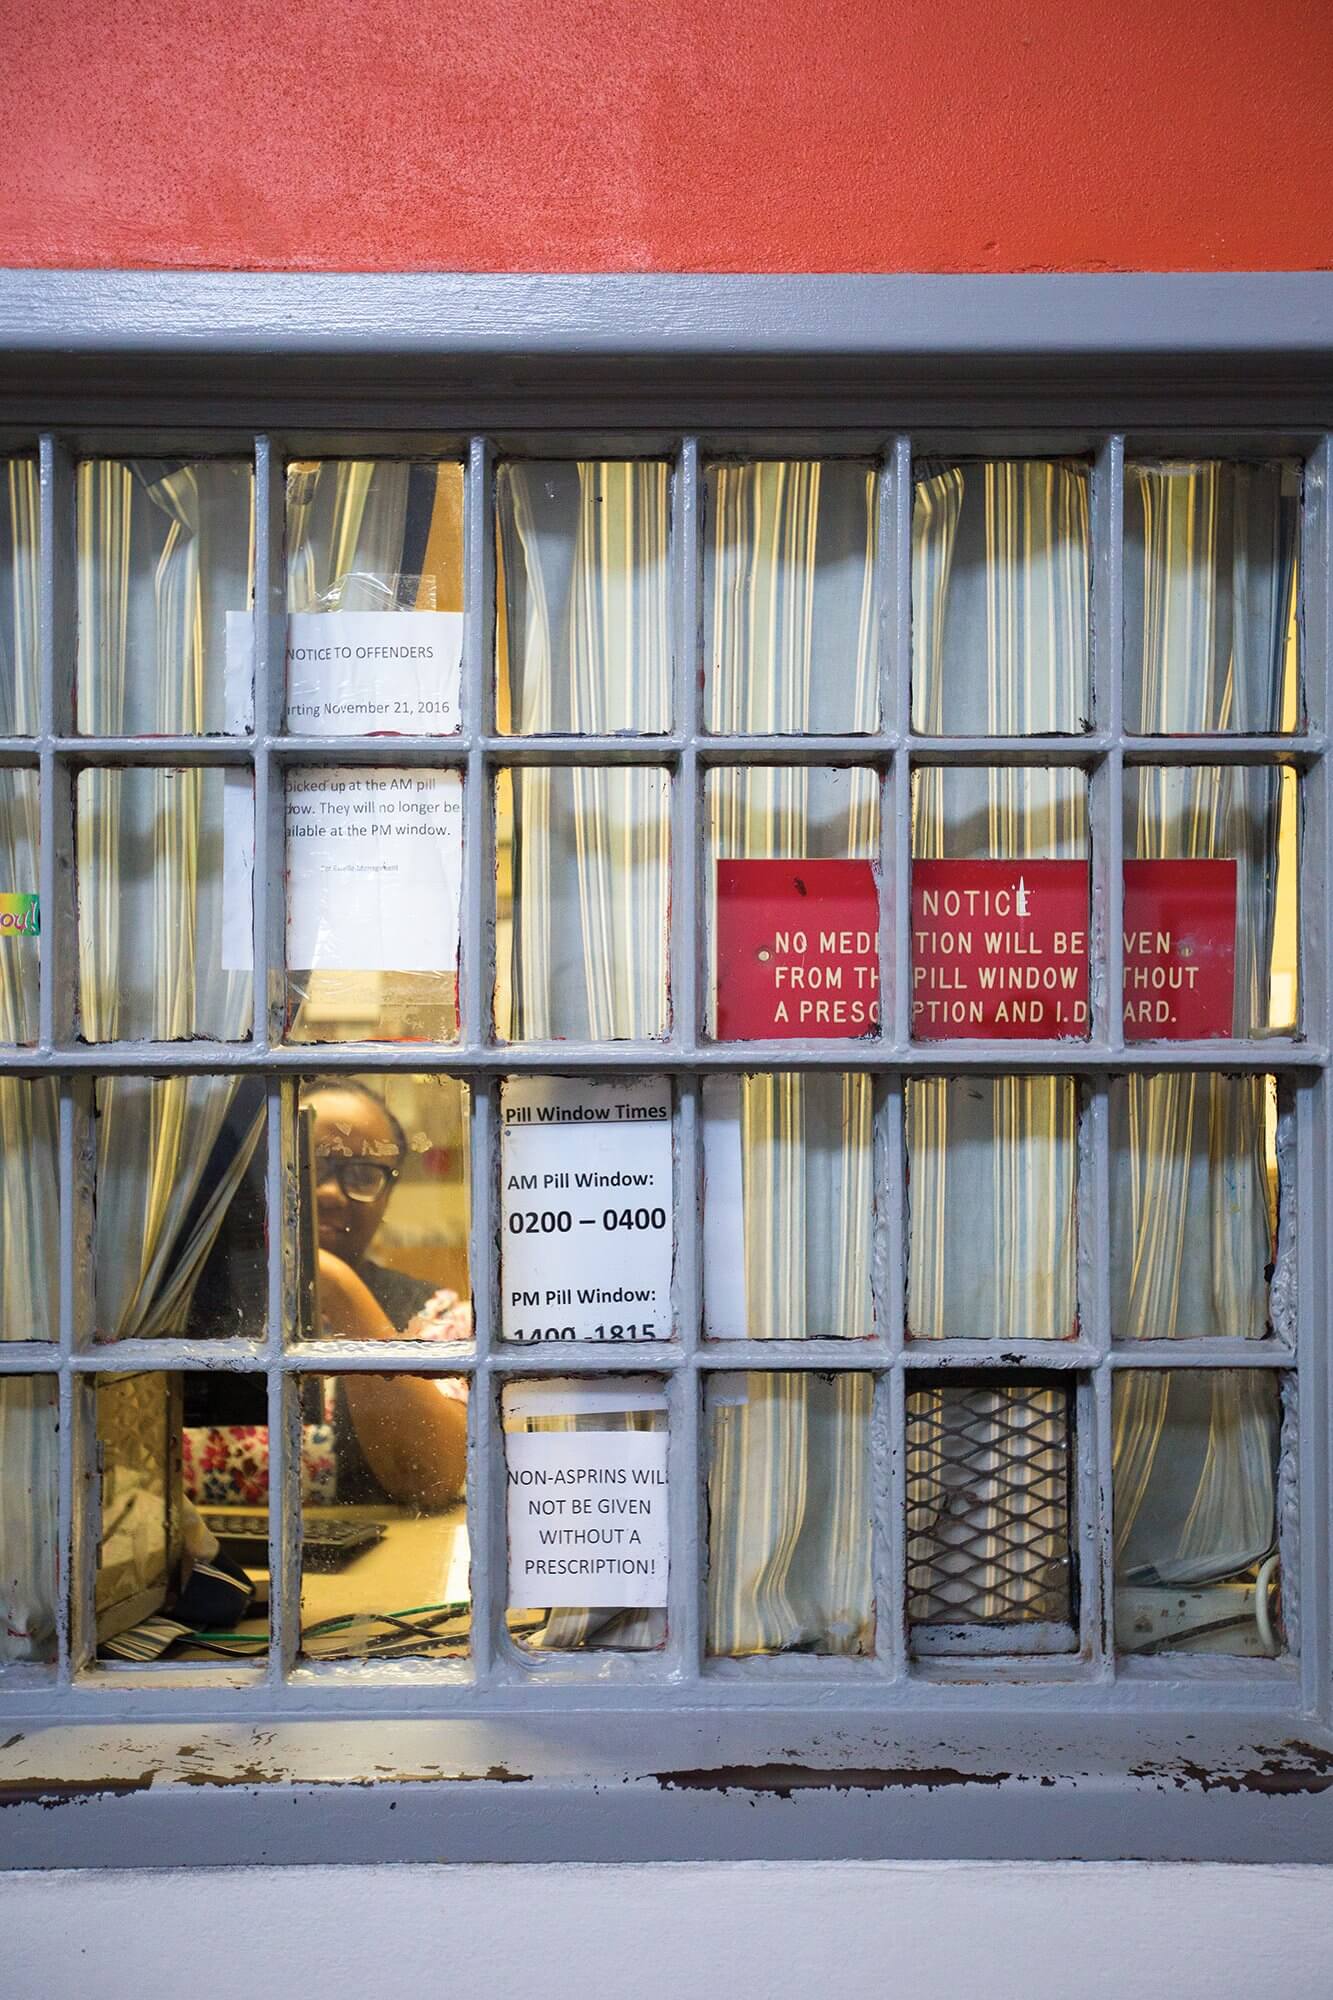 The pill window, where offenders are responsible for picking up their medications at a scheduled time each day.